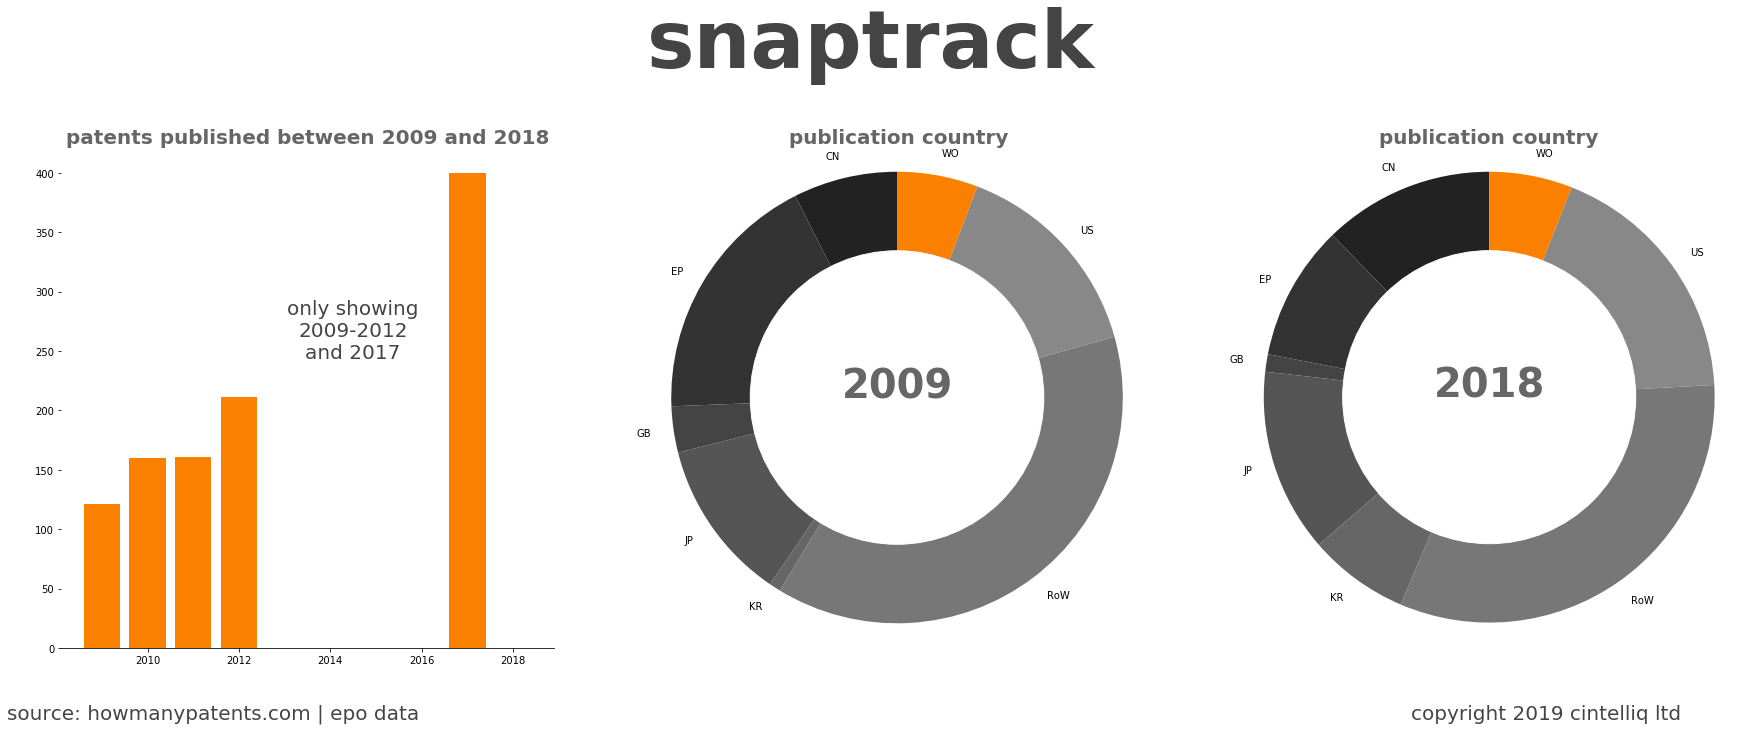 summary of patents for Snaptrack